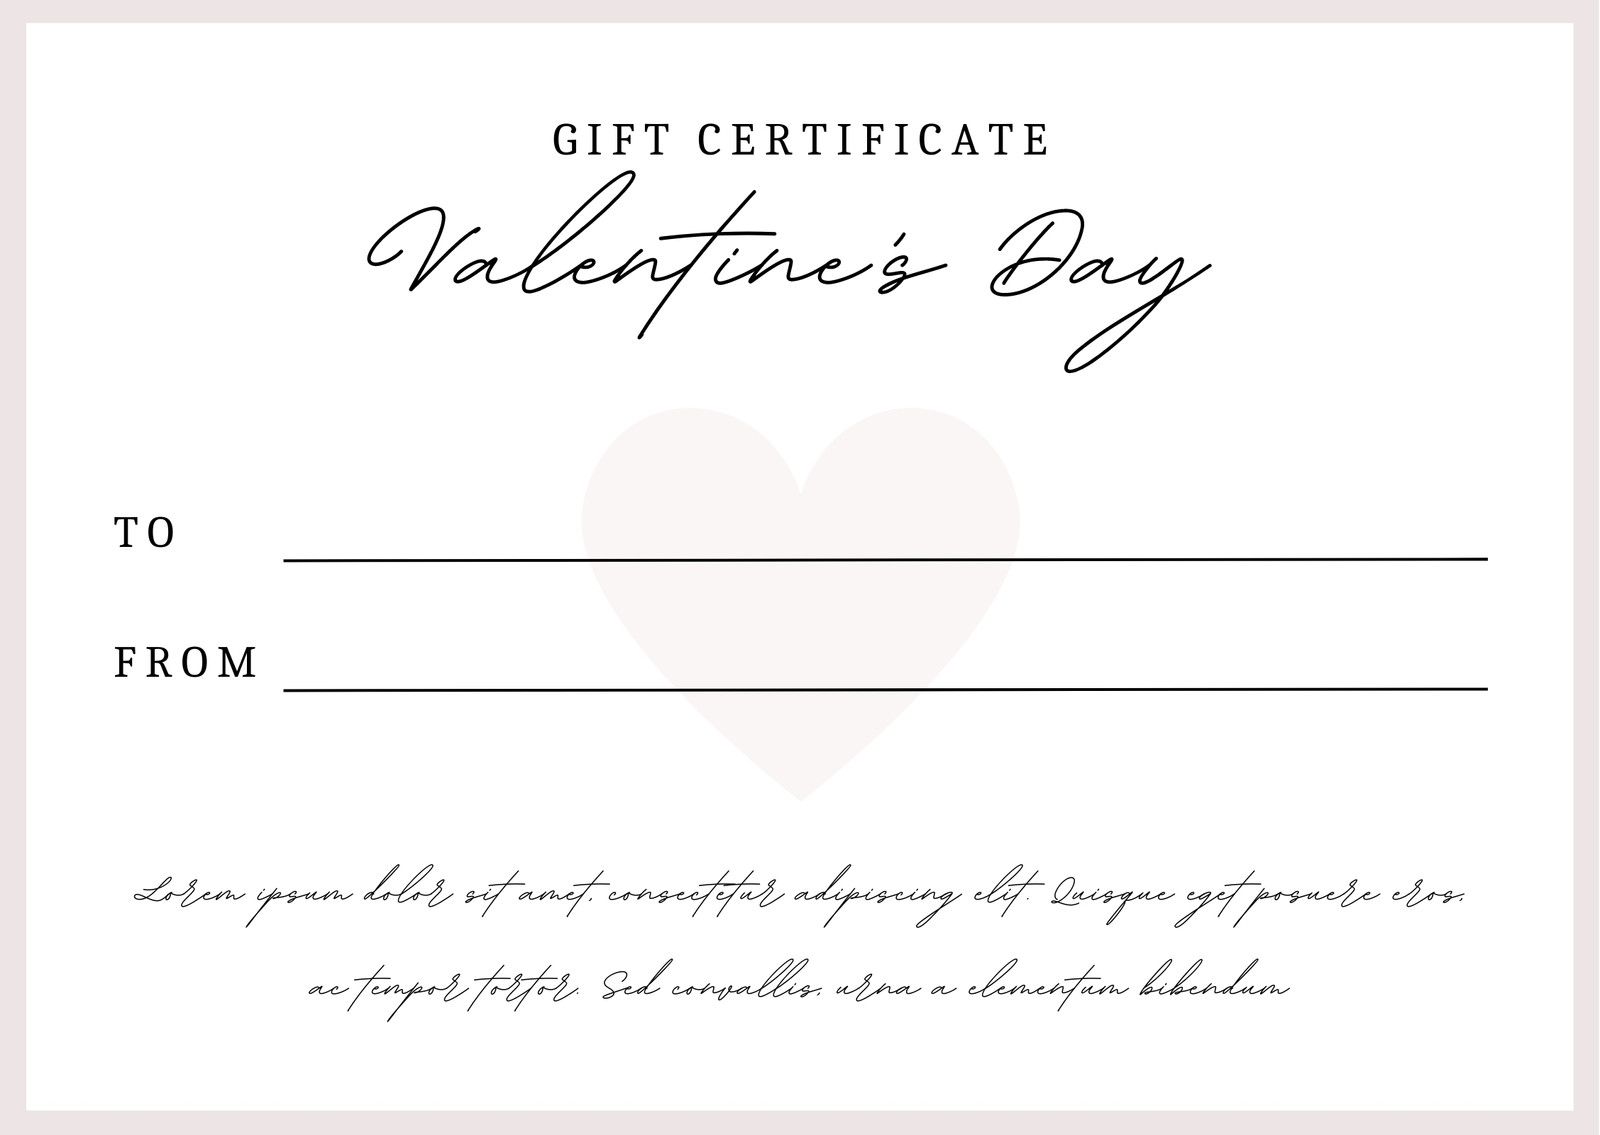 Gift Certificates - Deal of the Day